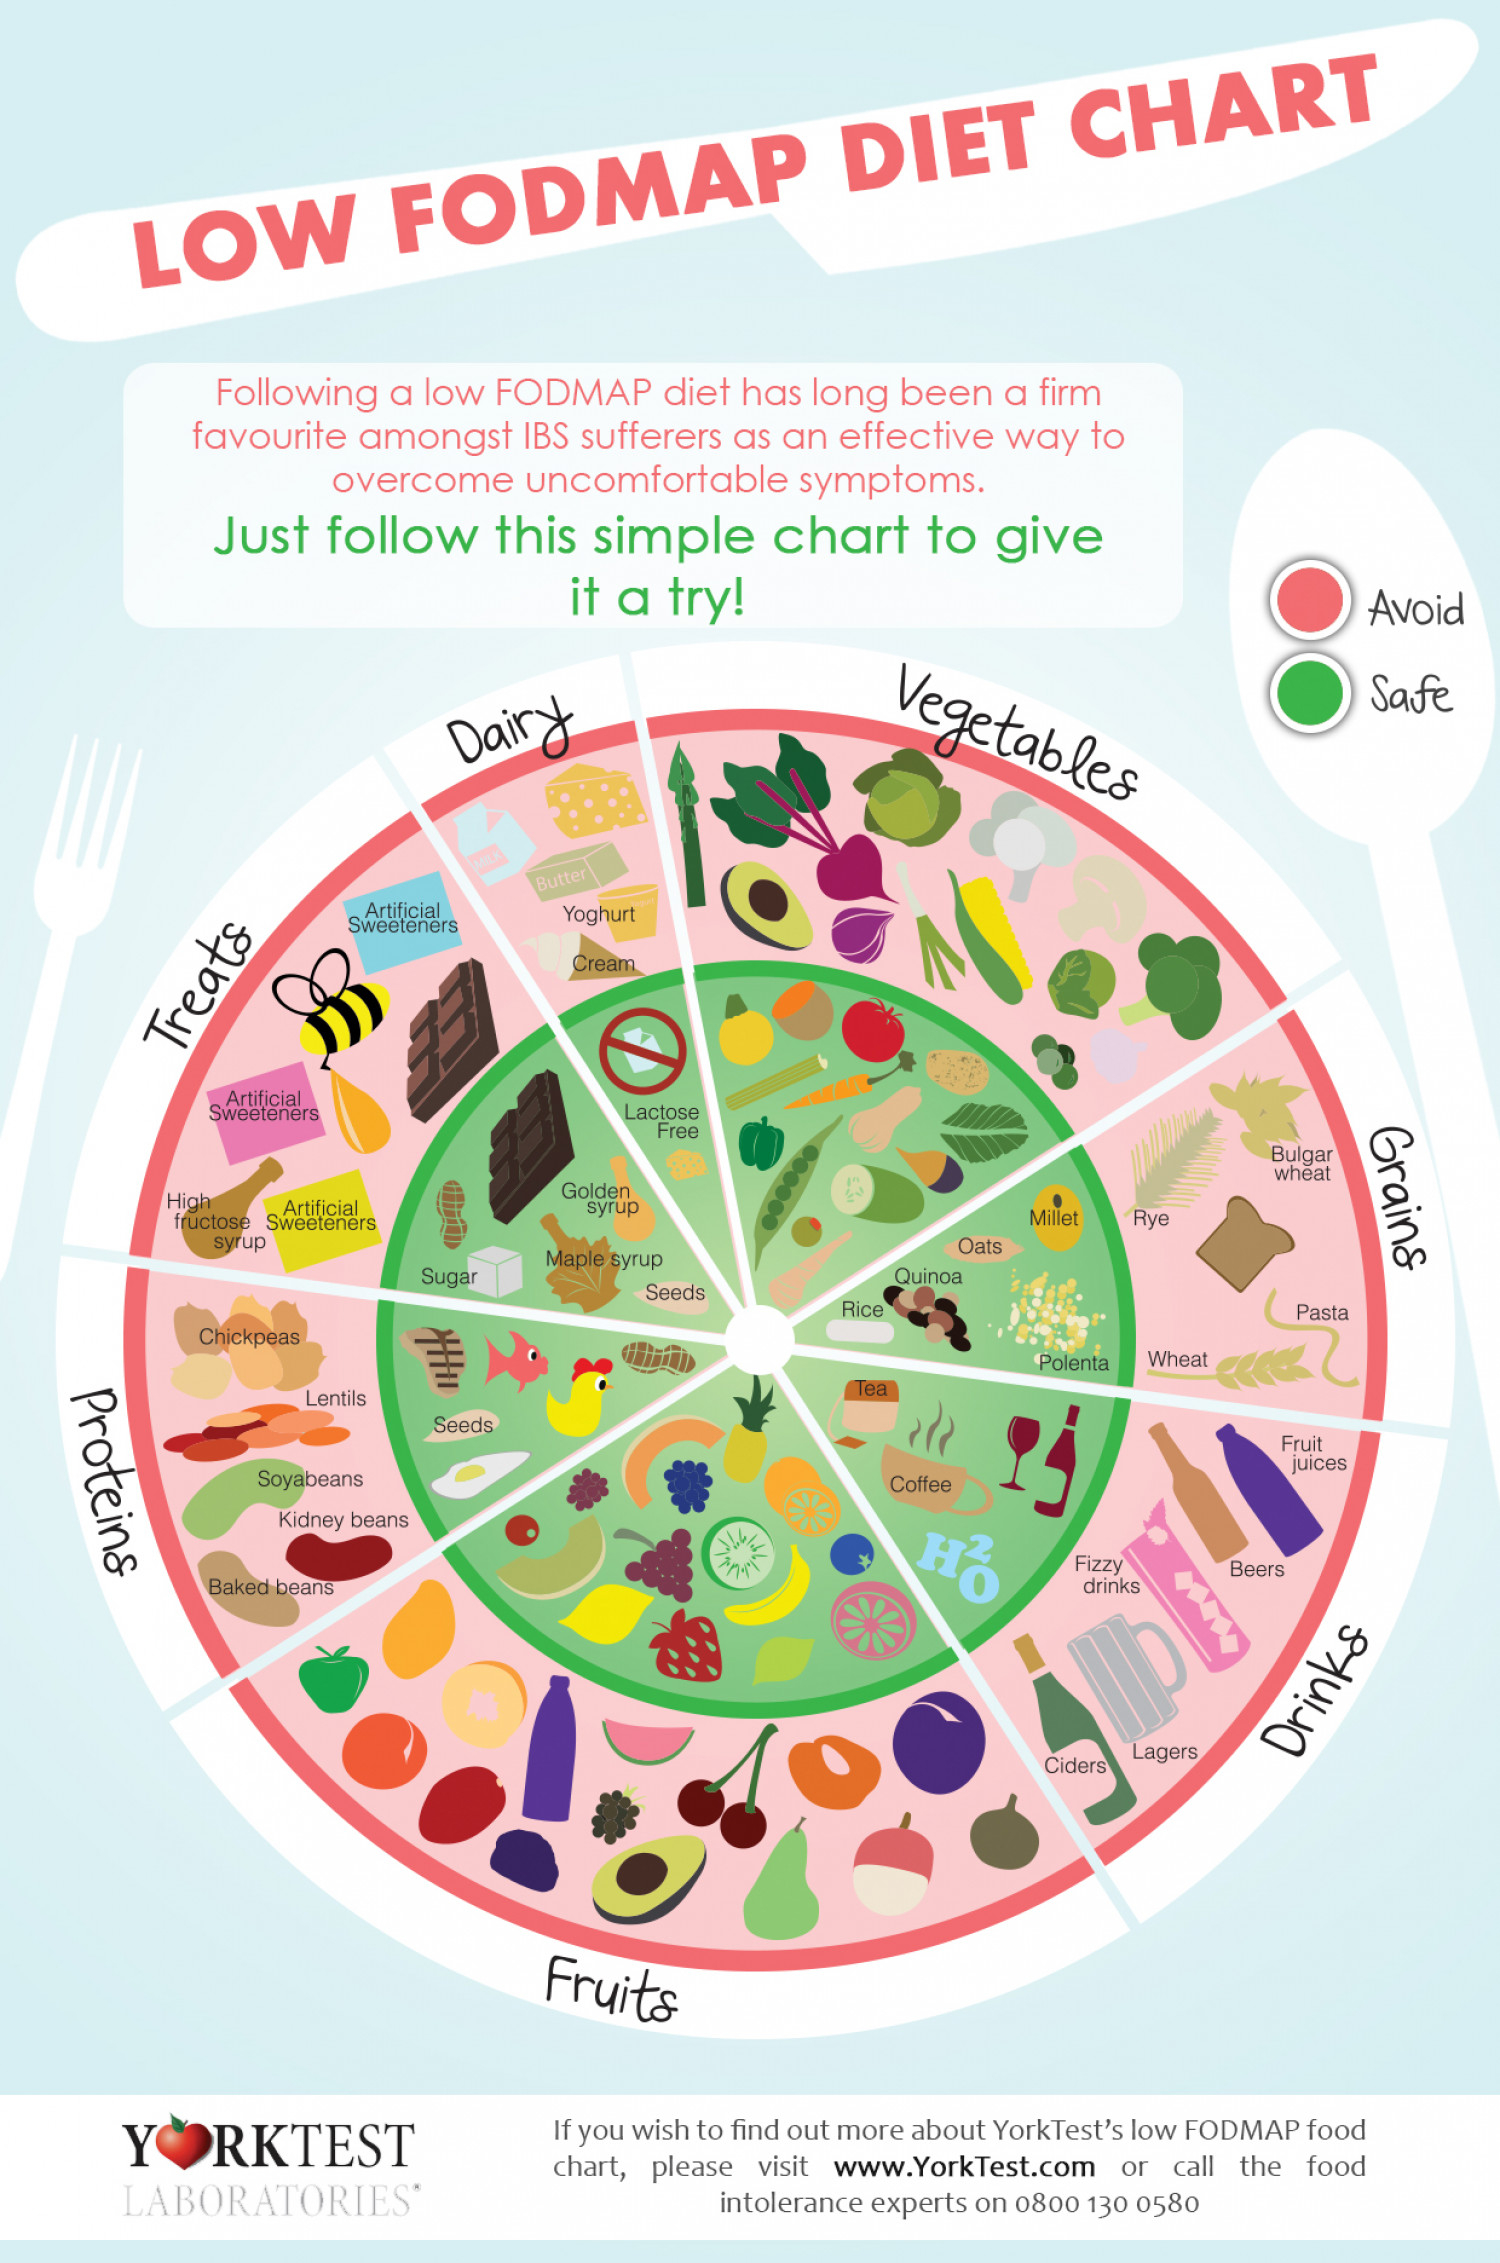 Low Fodmap Diet Chart Visual ly